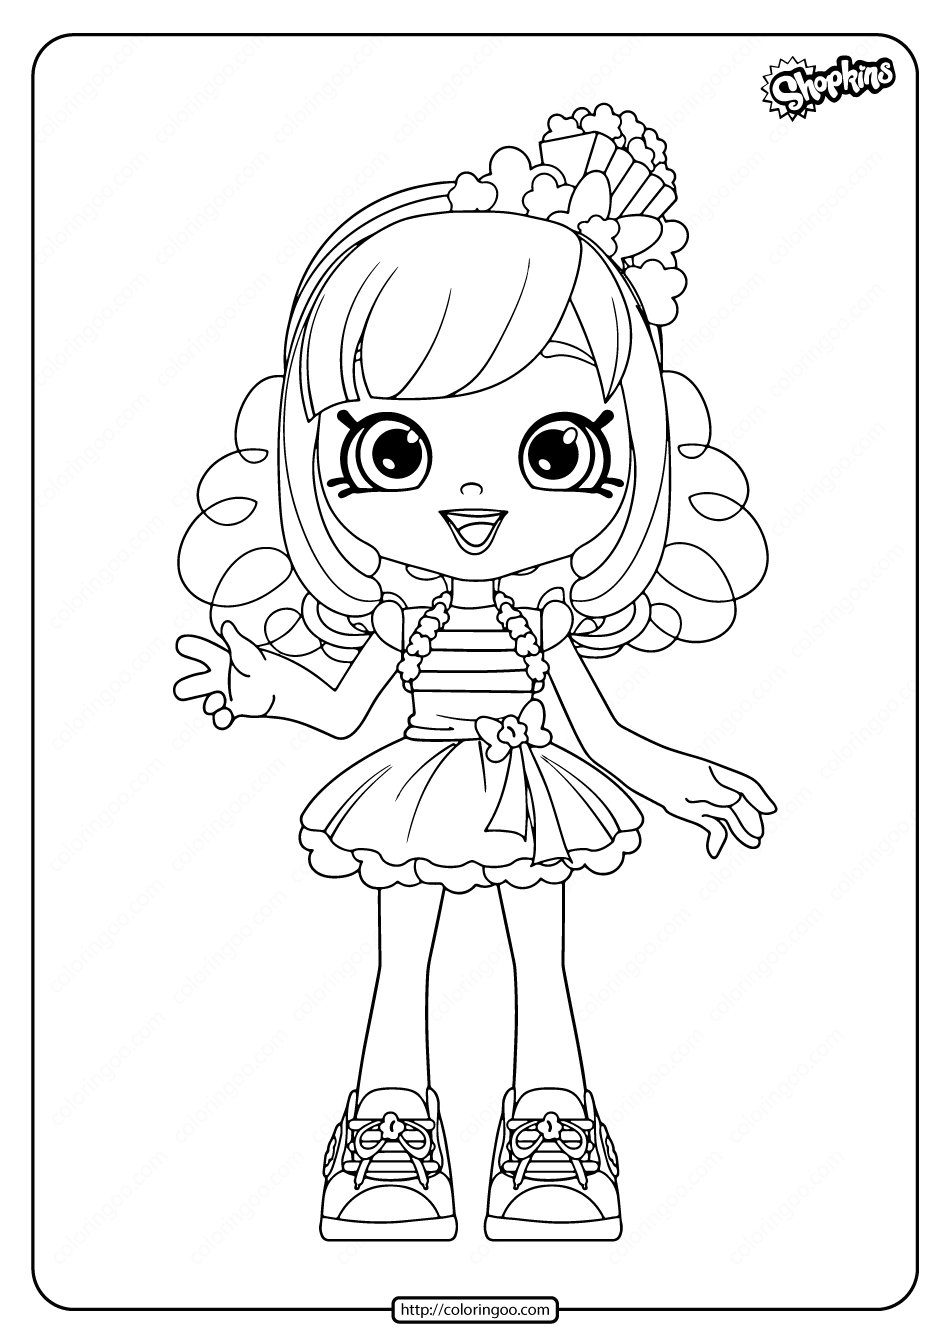 printable shopkins popette coloring pages